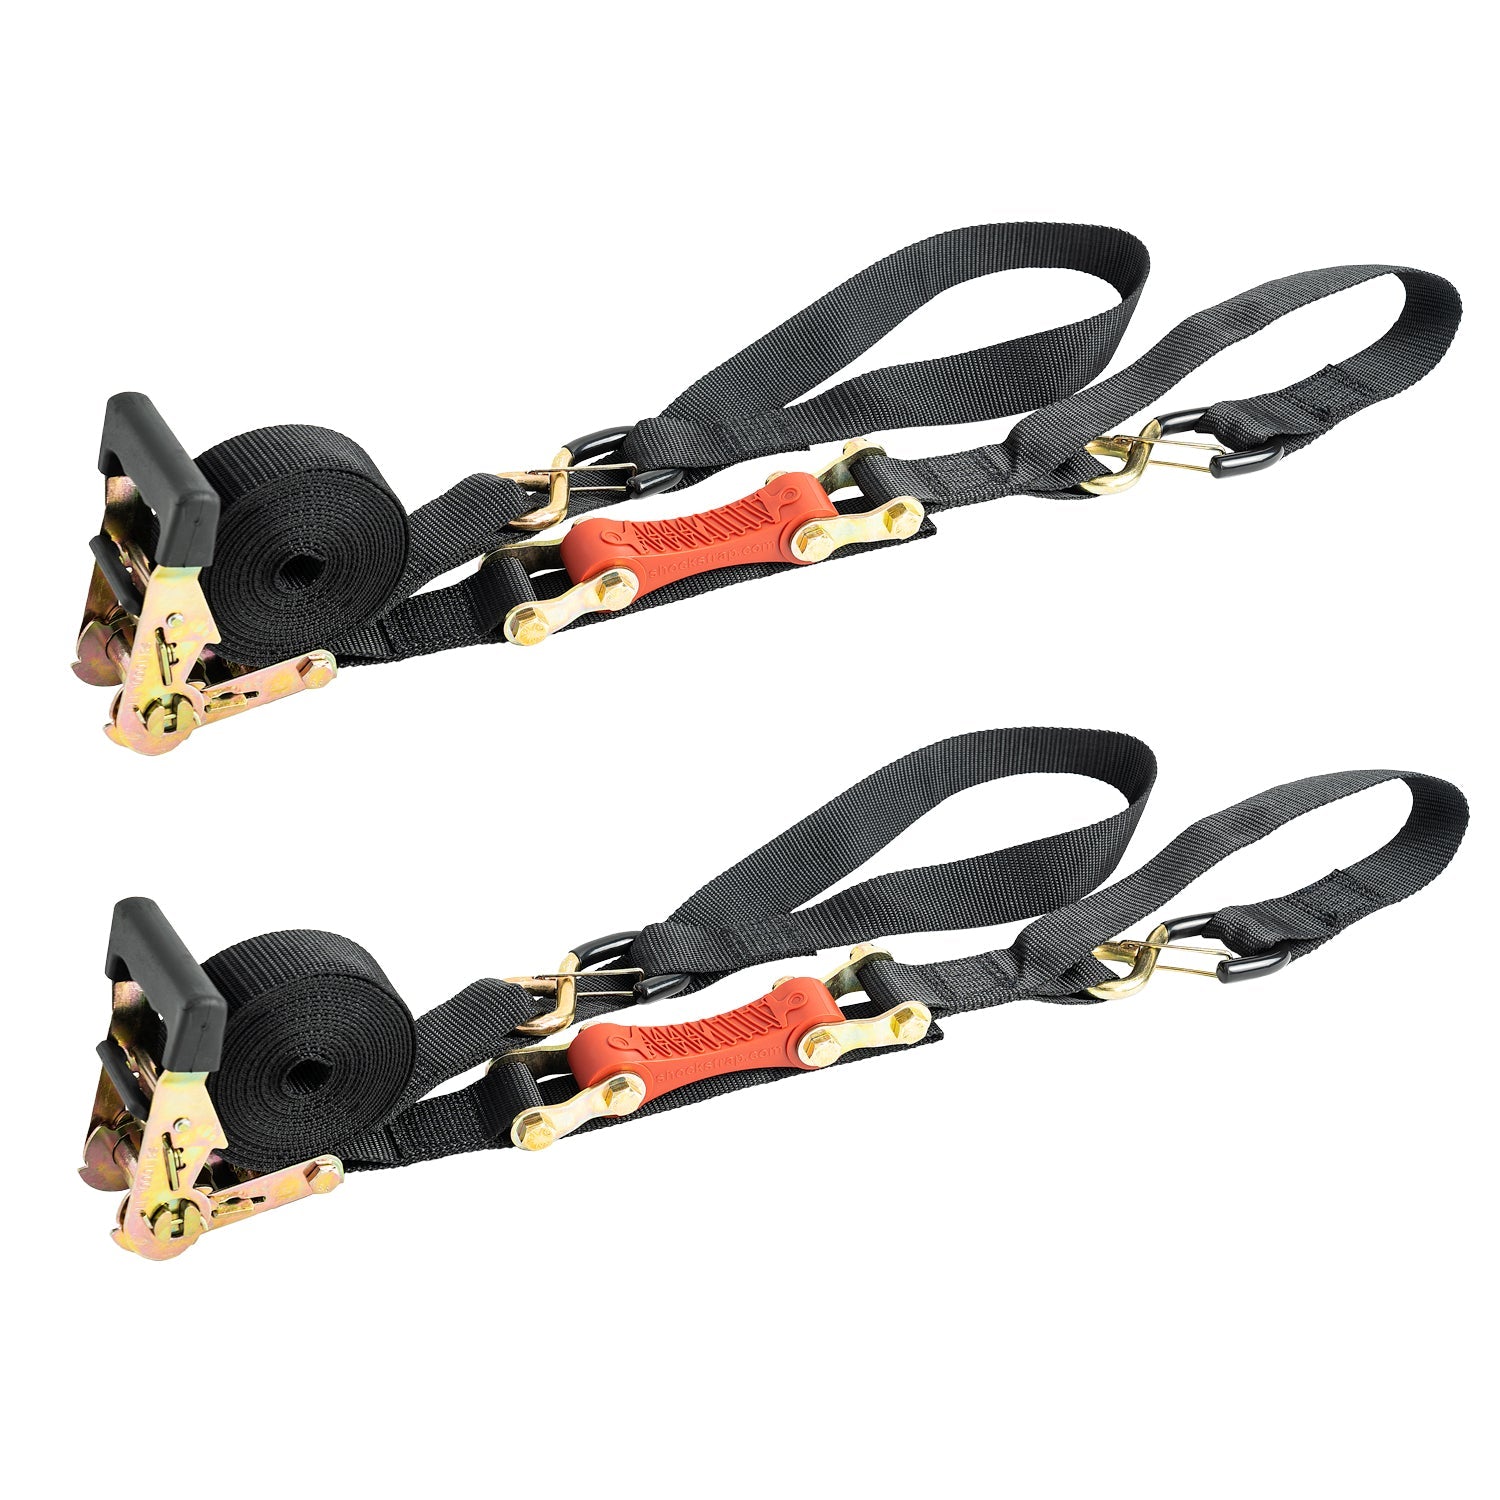 9ft x 2in ShockStrap Ratchet Strap with Wire Hooks, Premium Polyester